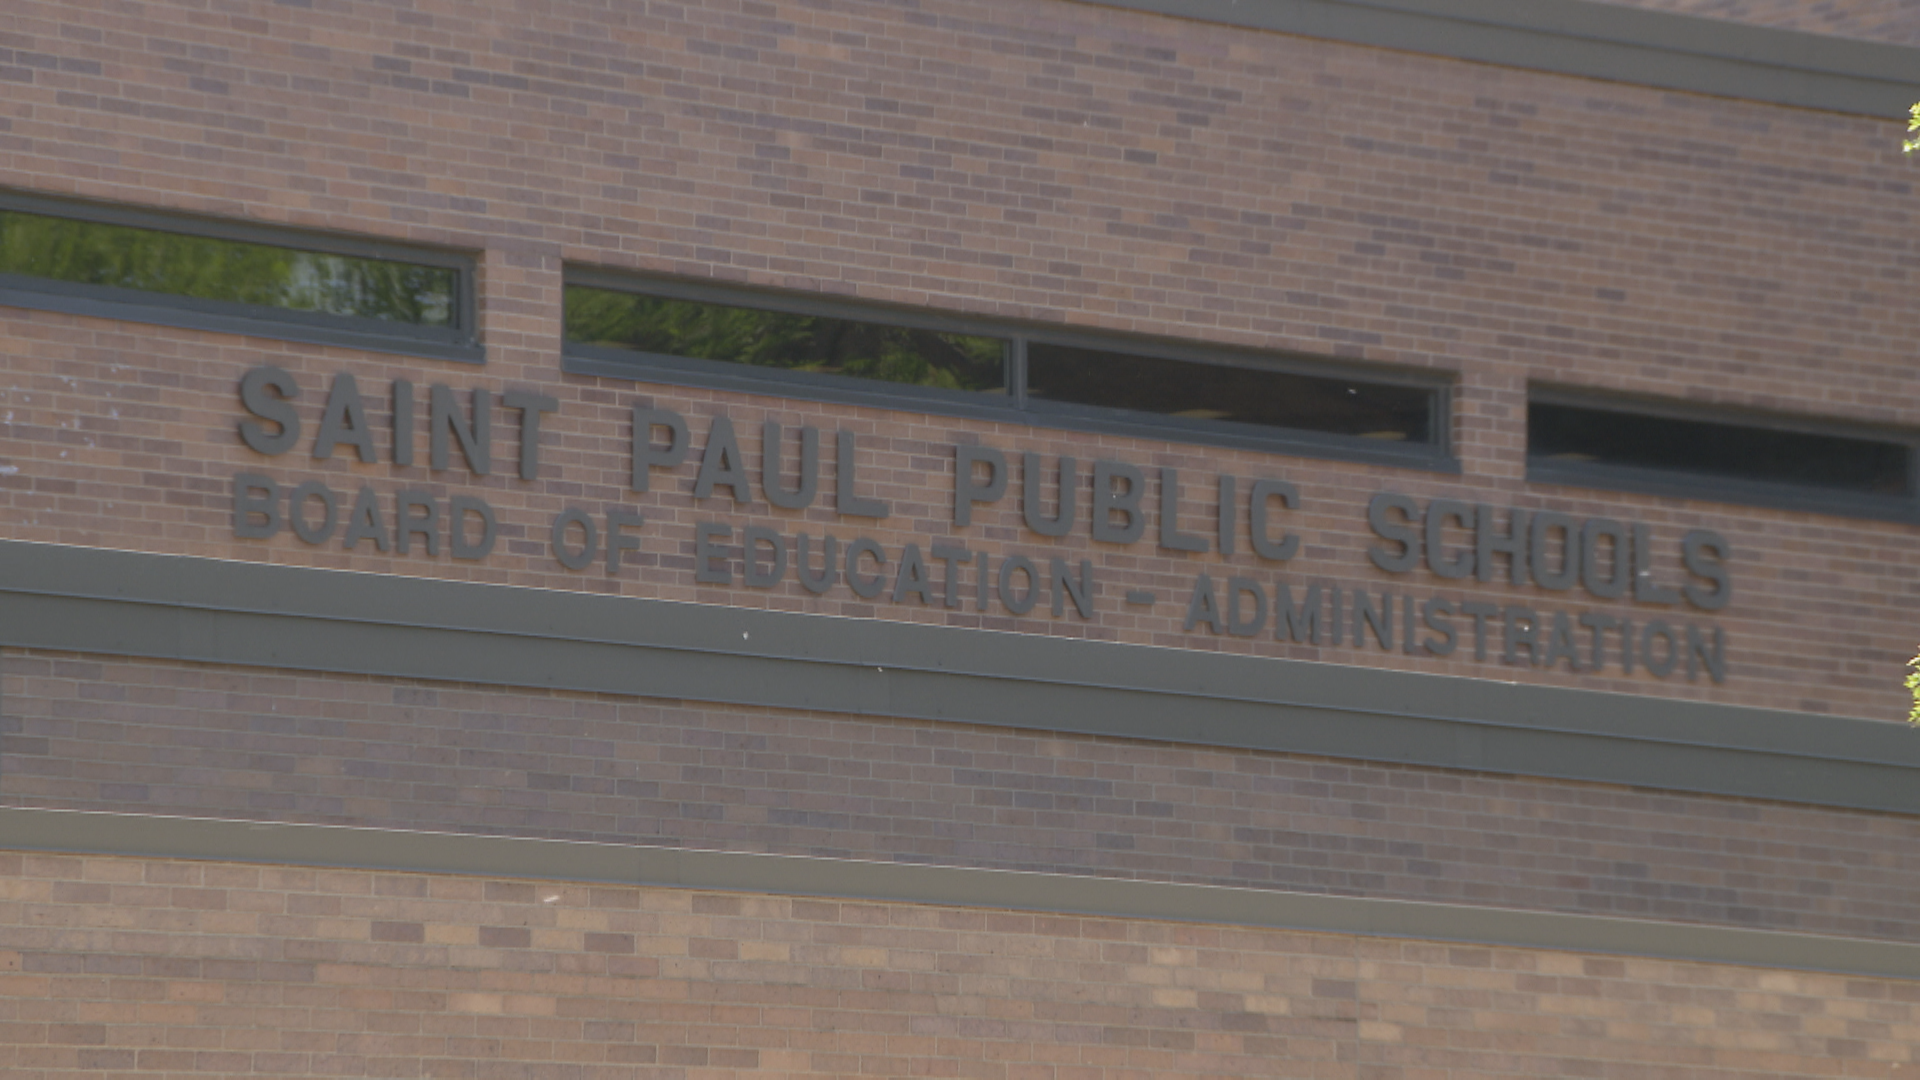 The St. Paul Public School district's Equity Committee presented their ideas to the community on Tuesday.